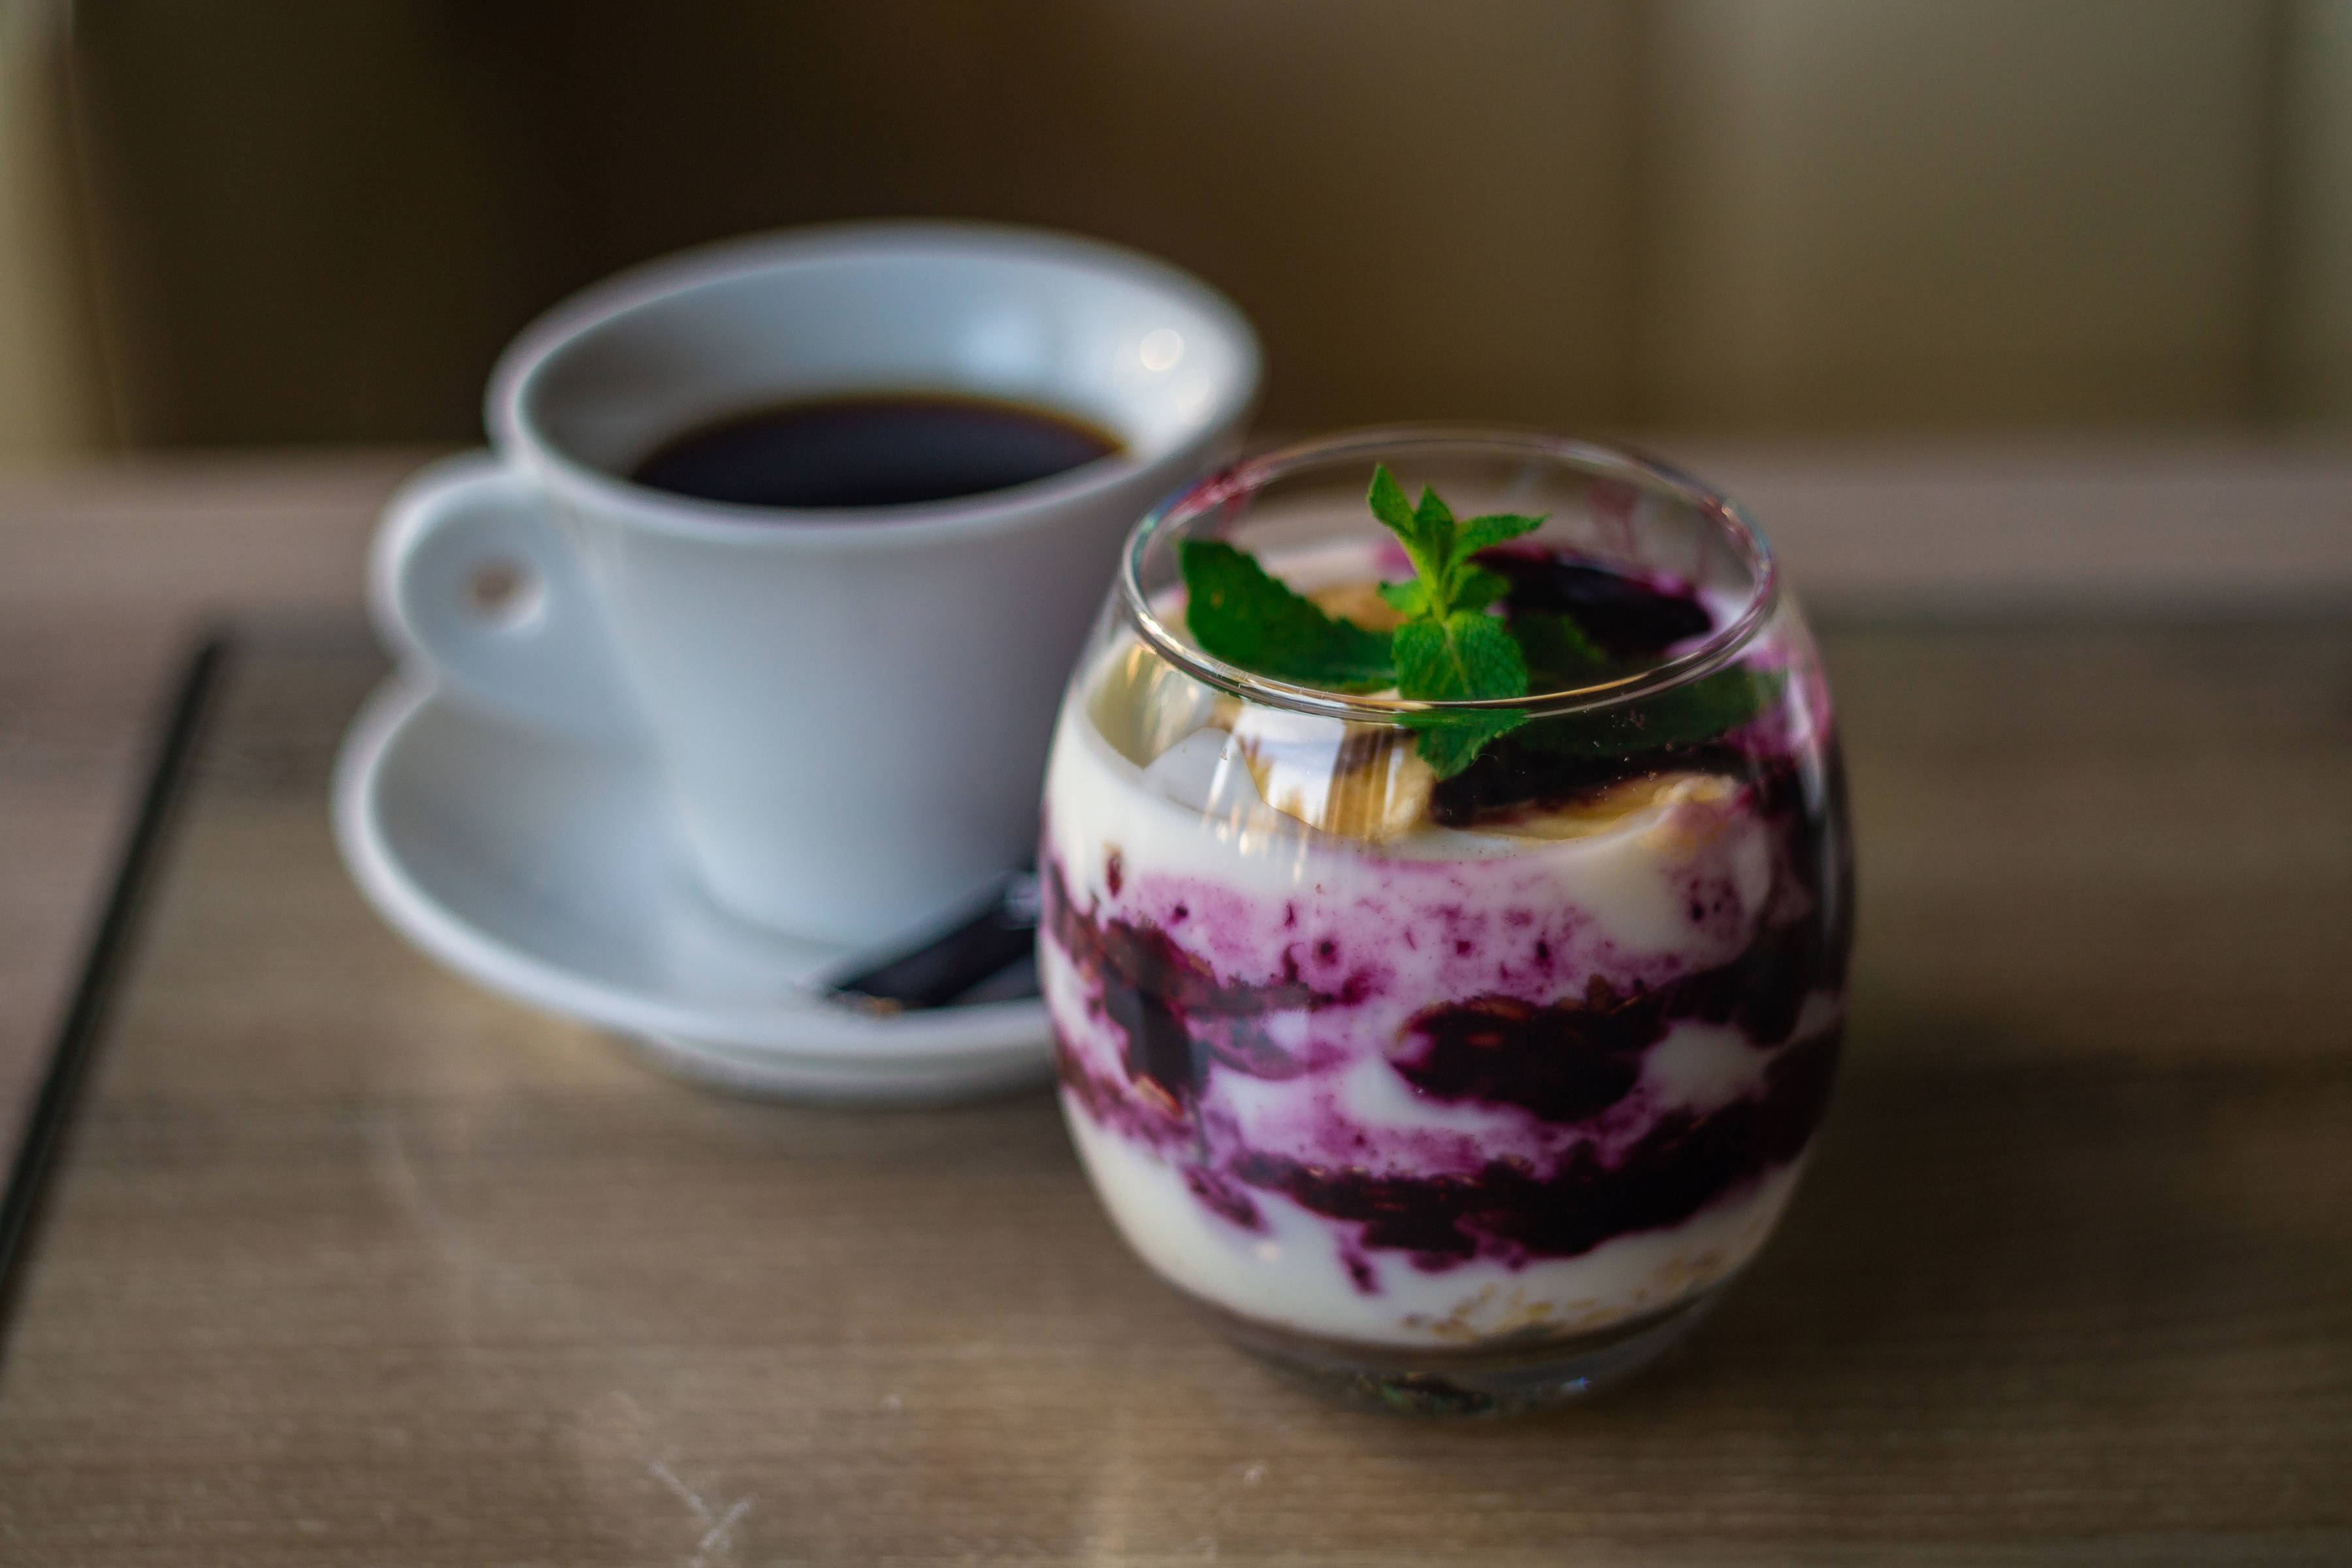 Blueberry overnight oats presented in a glass with a cup of black coffee in the background.